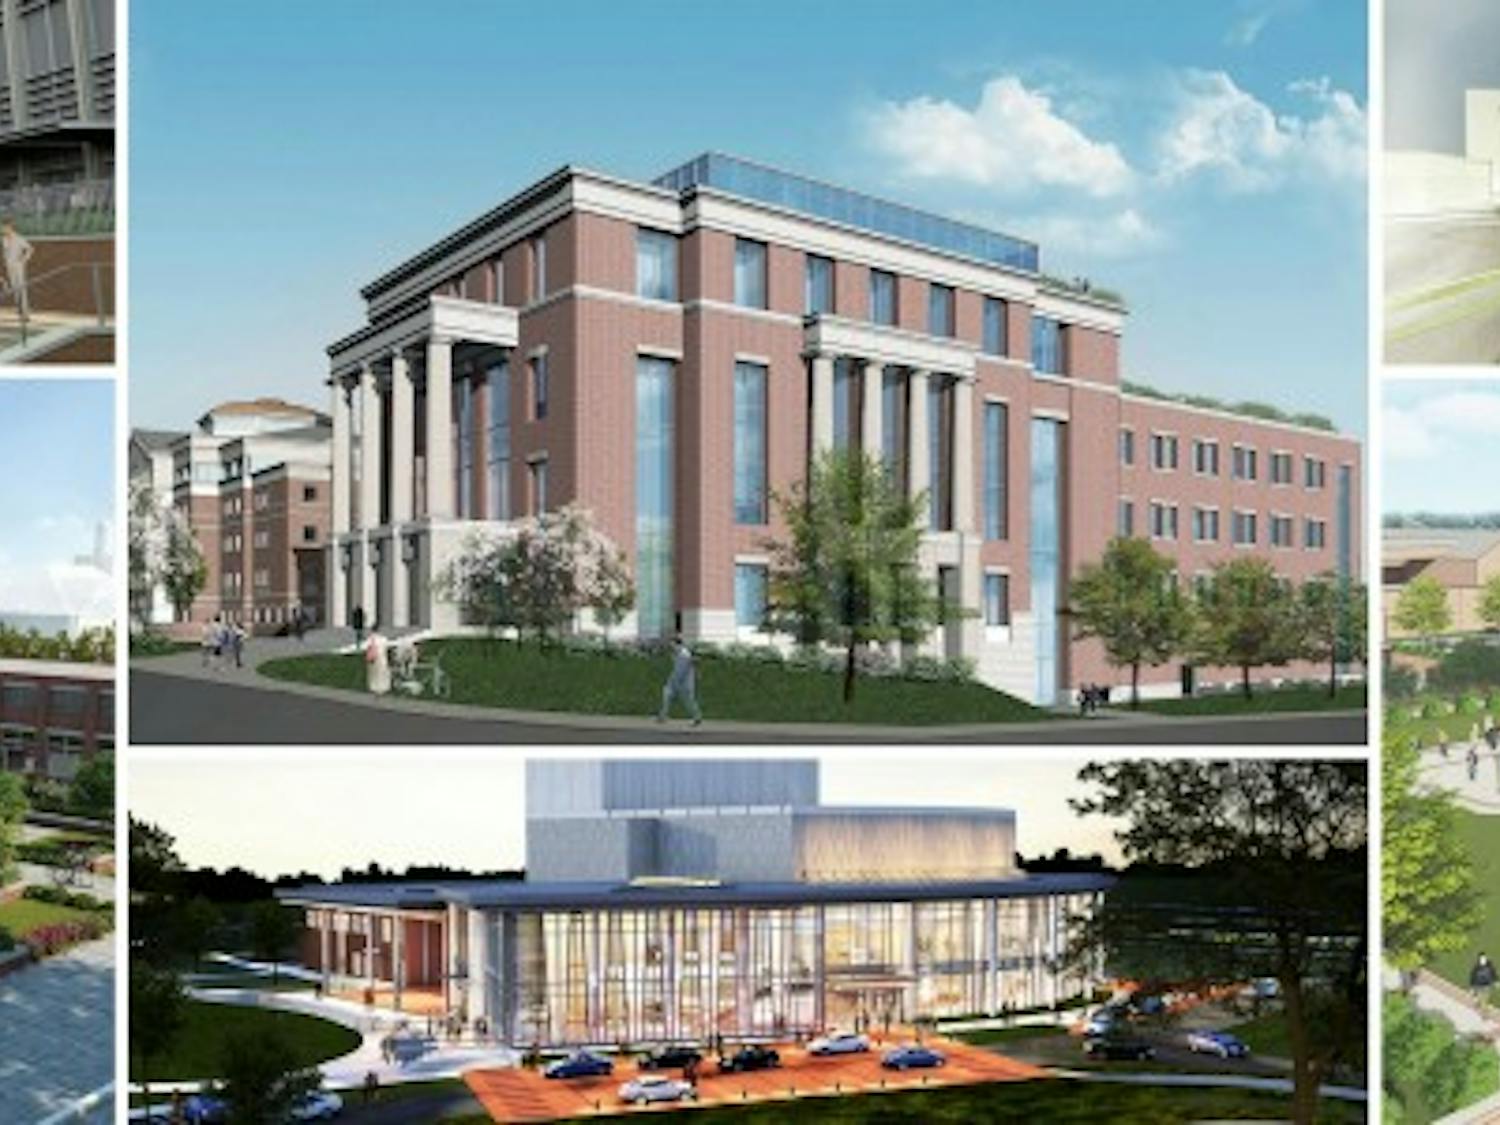 These six construction projects will provide additional engineering and business leaning spaces, a performing arts center, a new addition to the stadium and a new outdoor learning and pedestrian space.